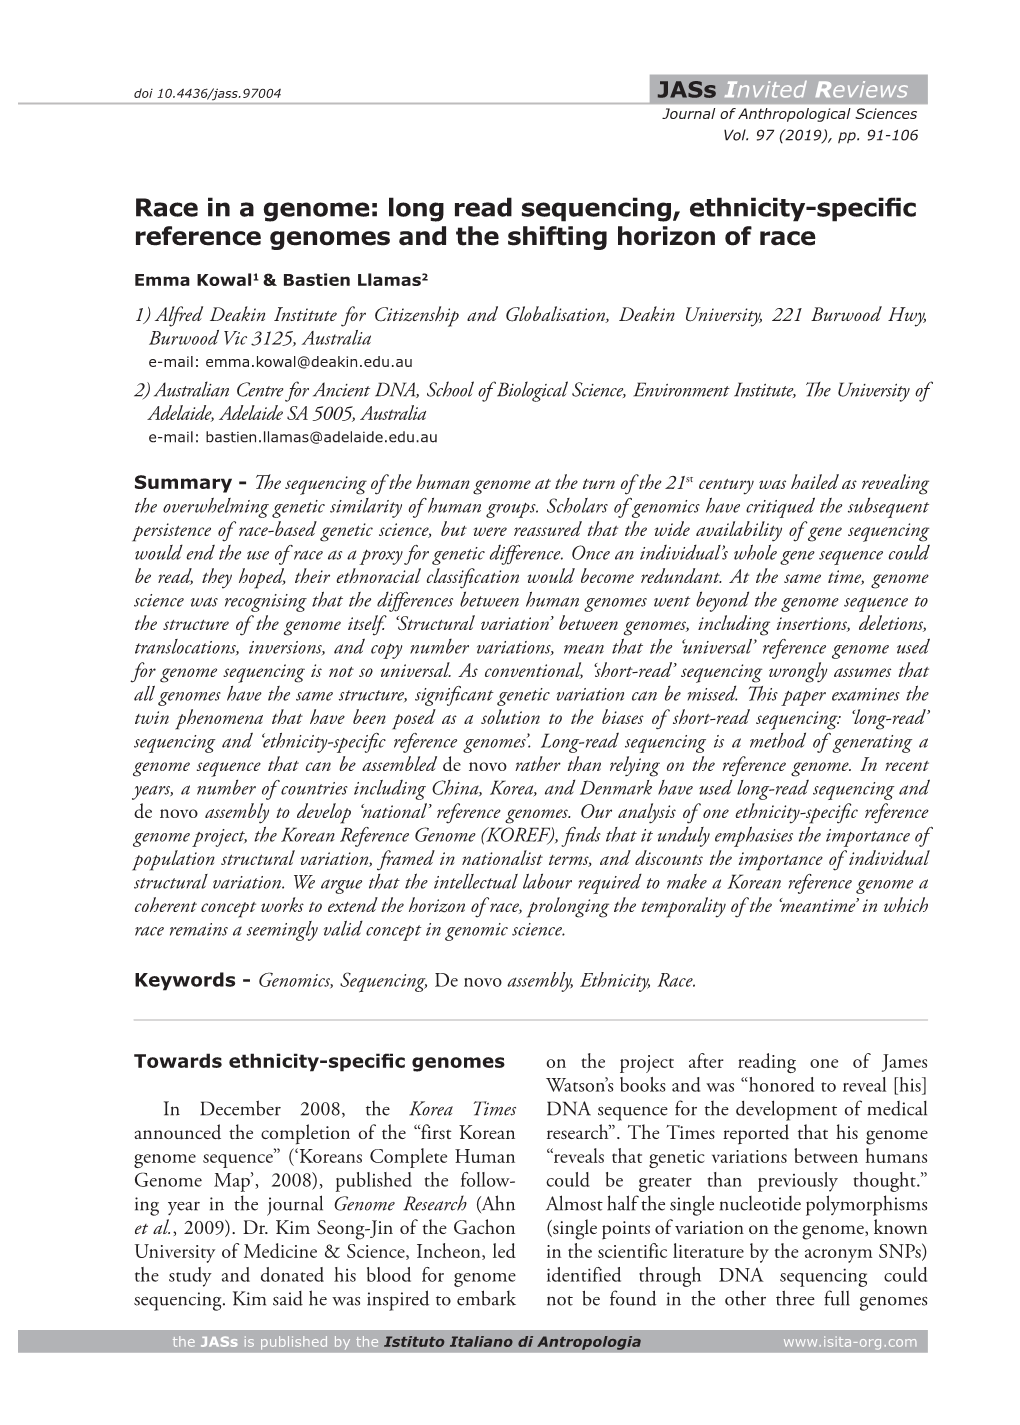 Race in a Genome: Long Read Sequencing, Ethnicity-Specific Reference Genomes and the Shifting Horizon of Race